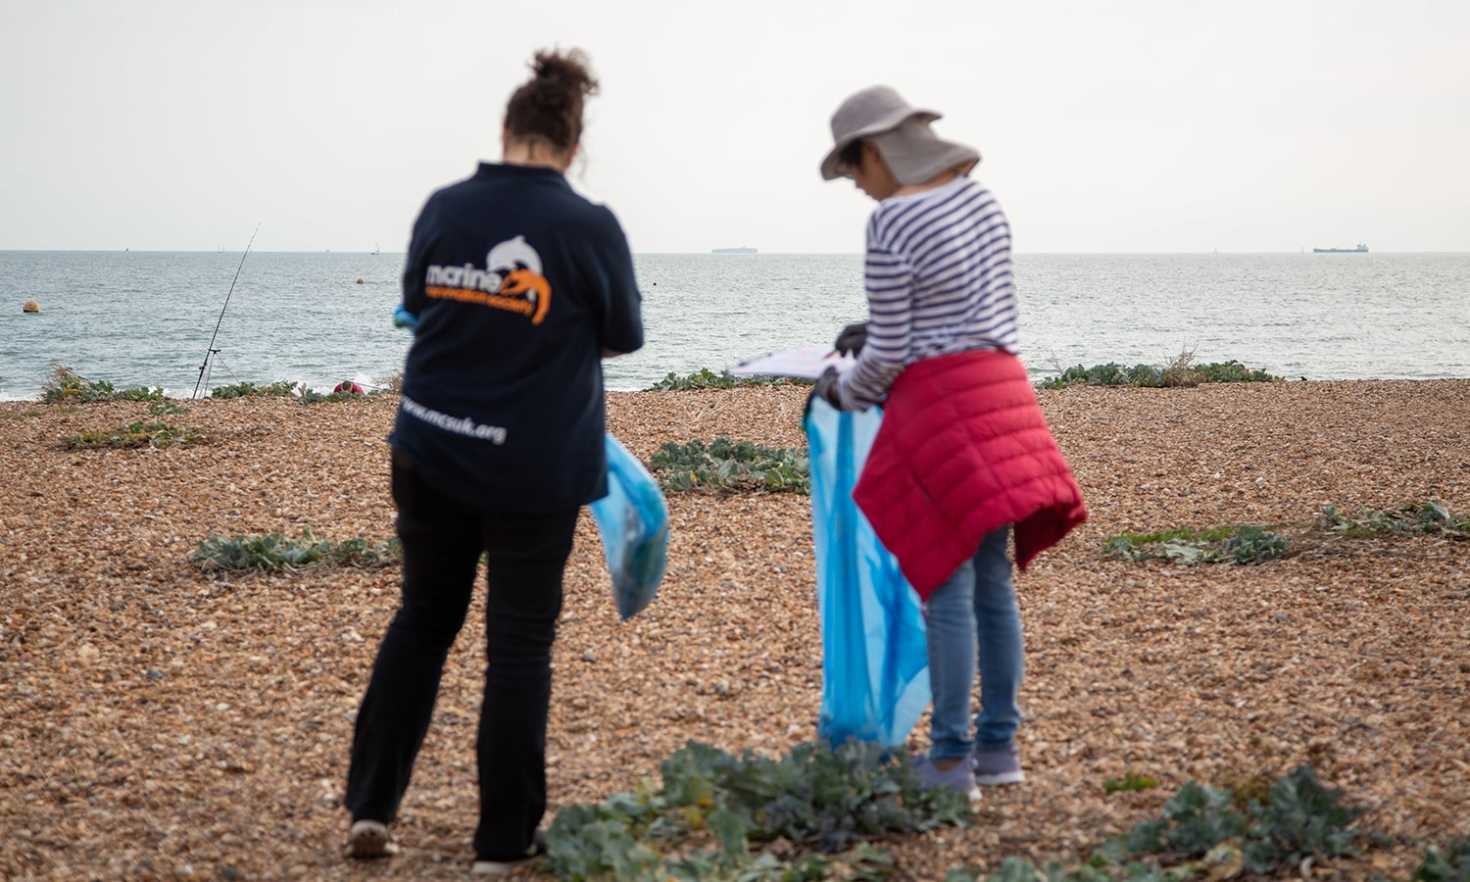 The Marine Conservation Society runs the Great British Beach Clean, an event where hundreds of beach cleans take place up and down the UK